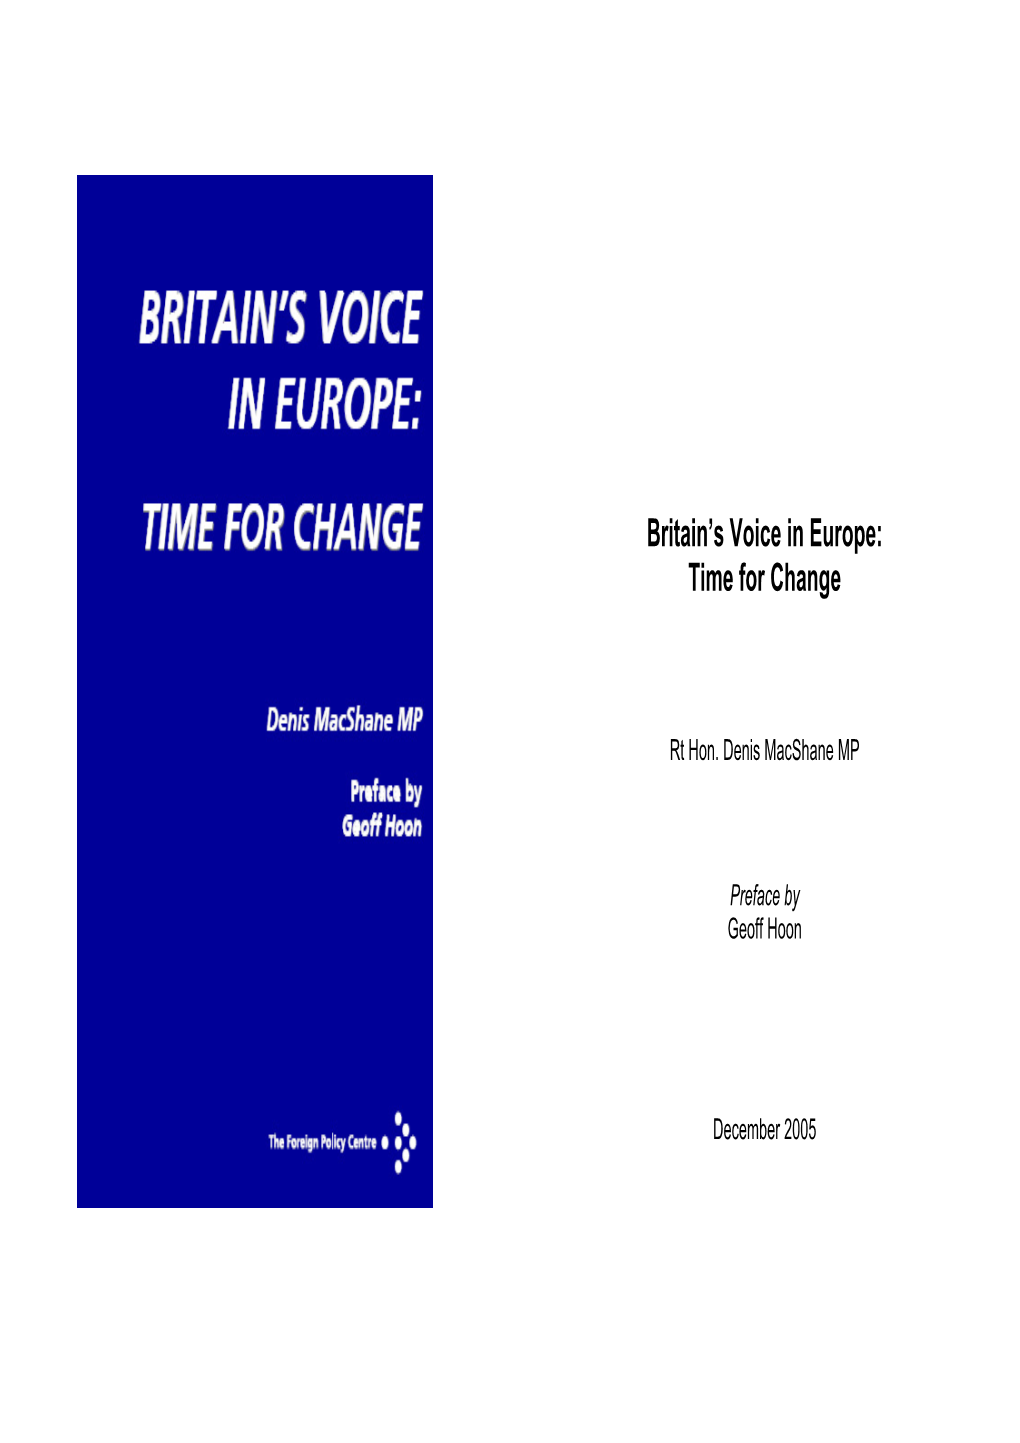 Britain's Voice in Europe: Time for Change